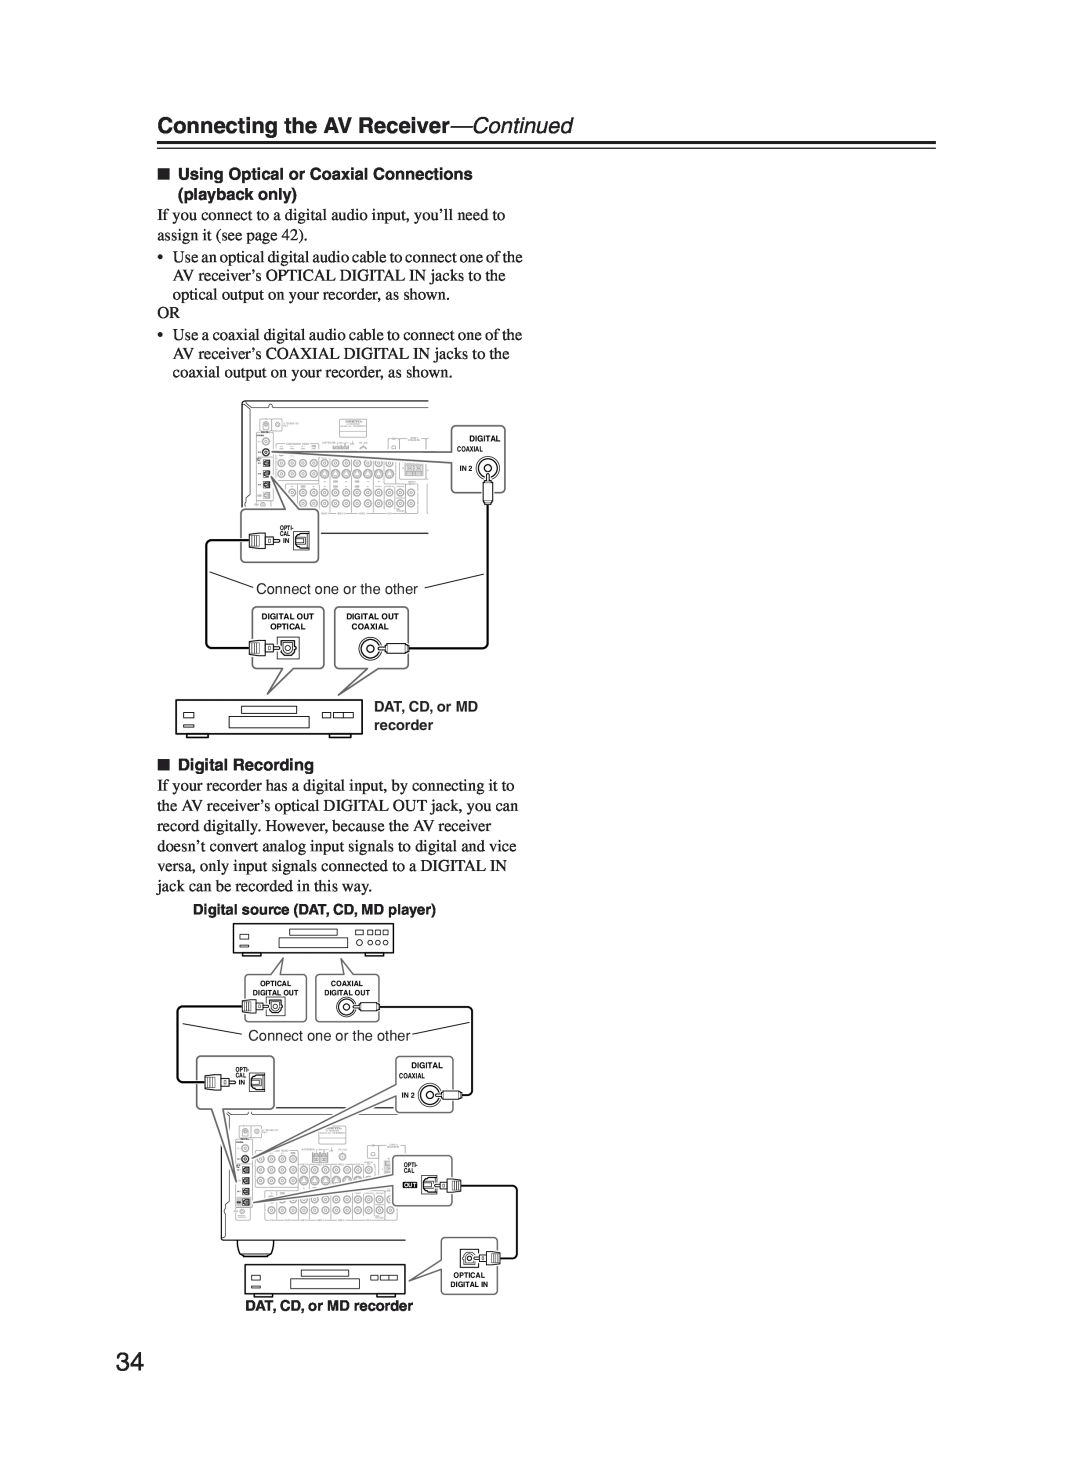 Onkyo TX-SR603X instruction manual Connecting the AV Receiver—Continued, Digital Recording 